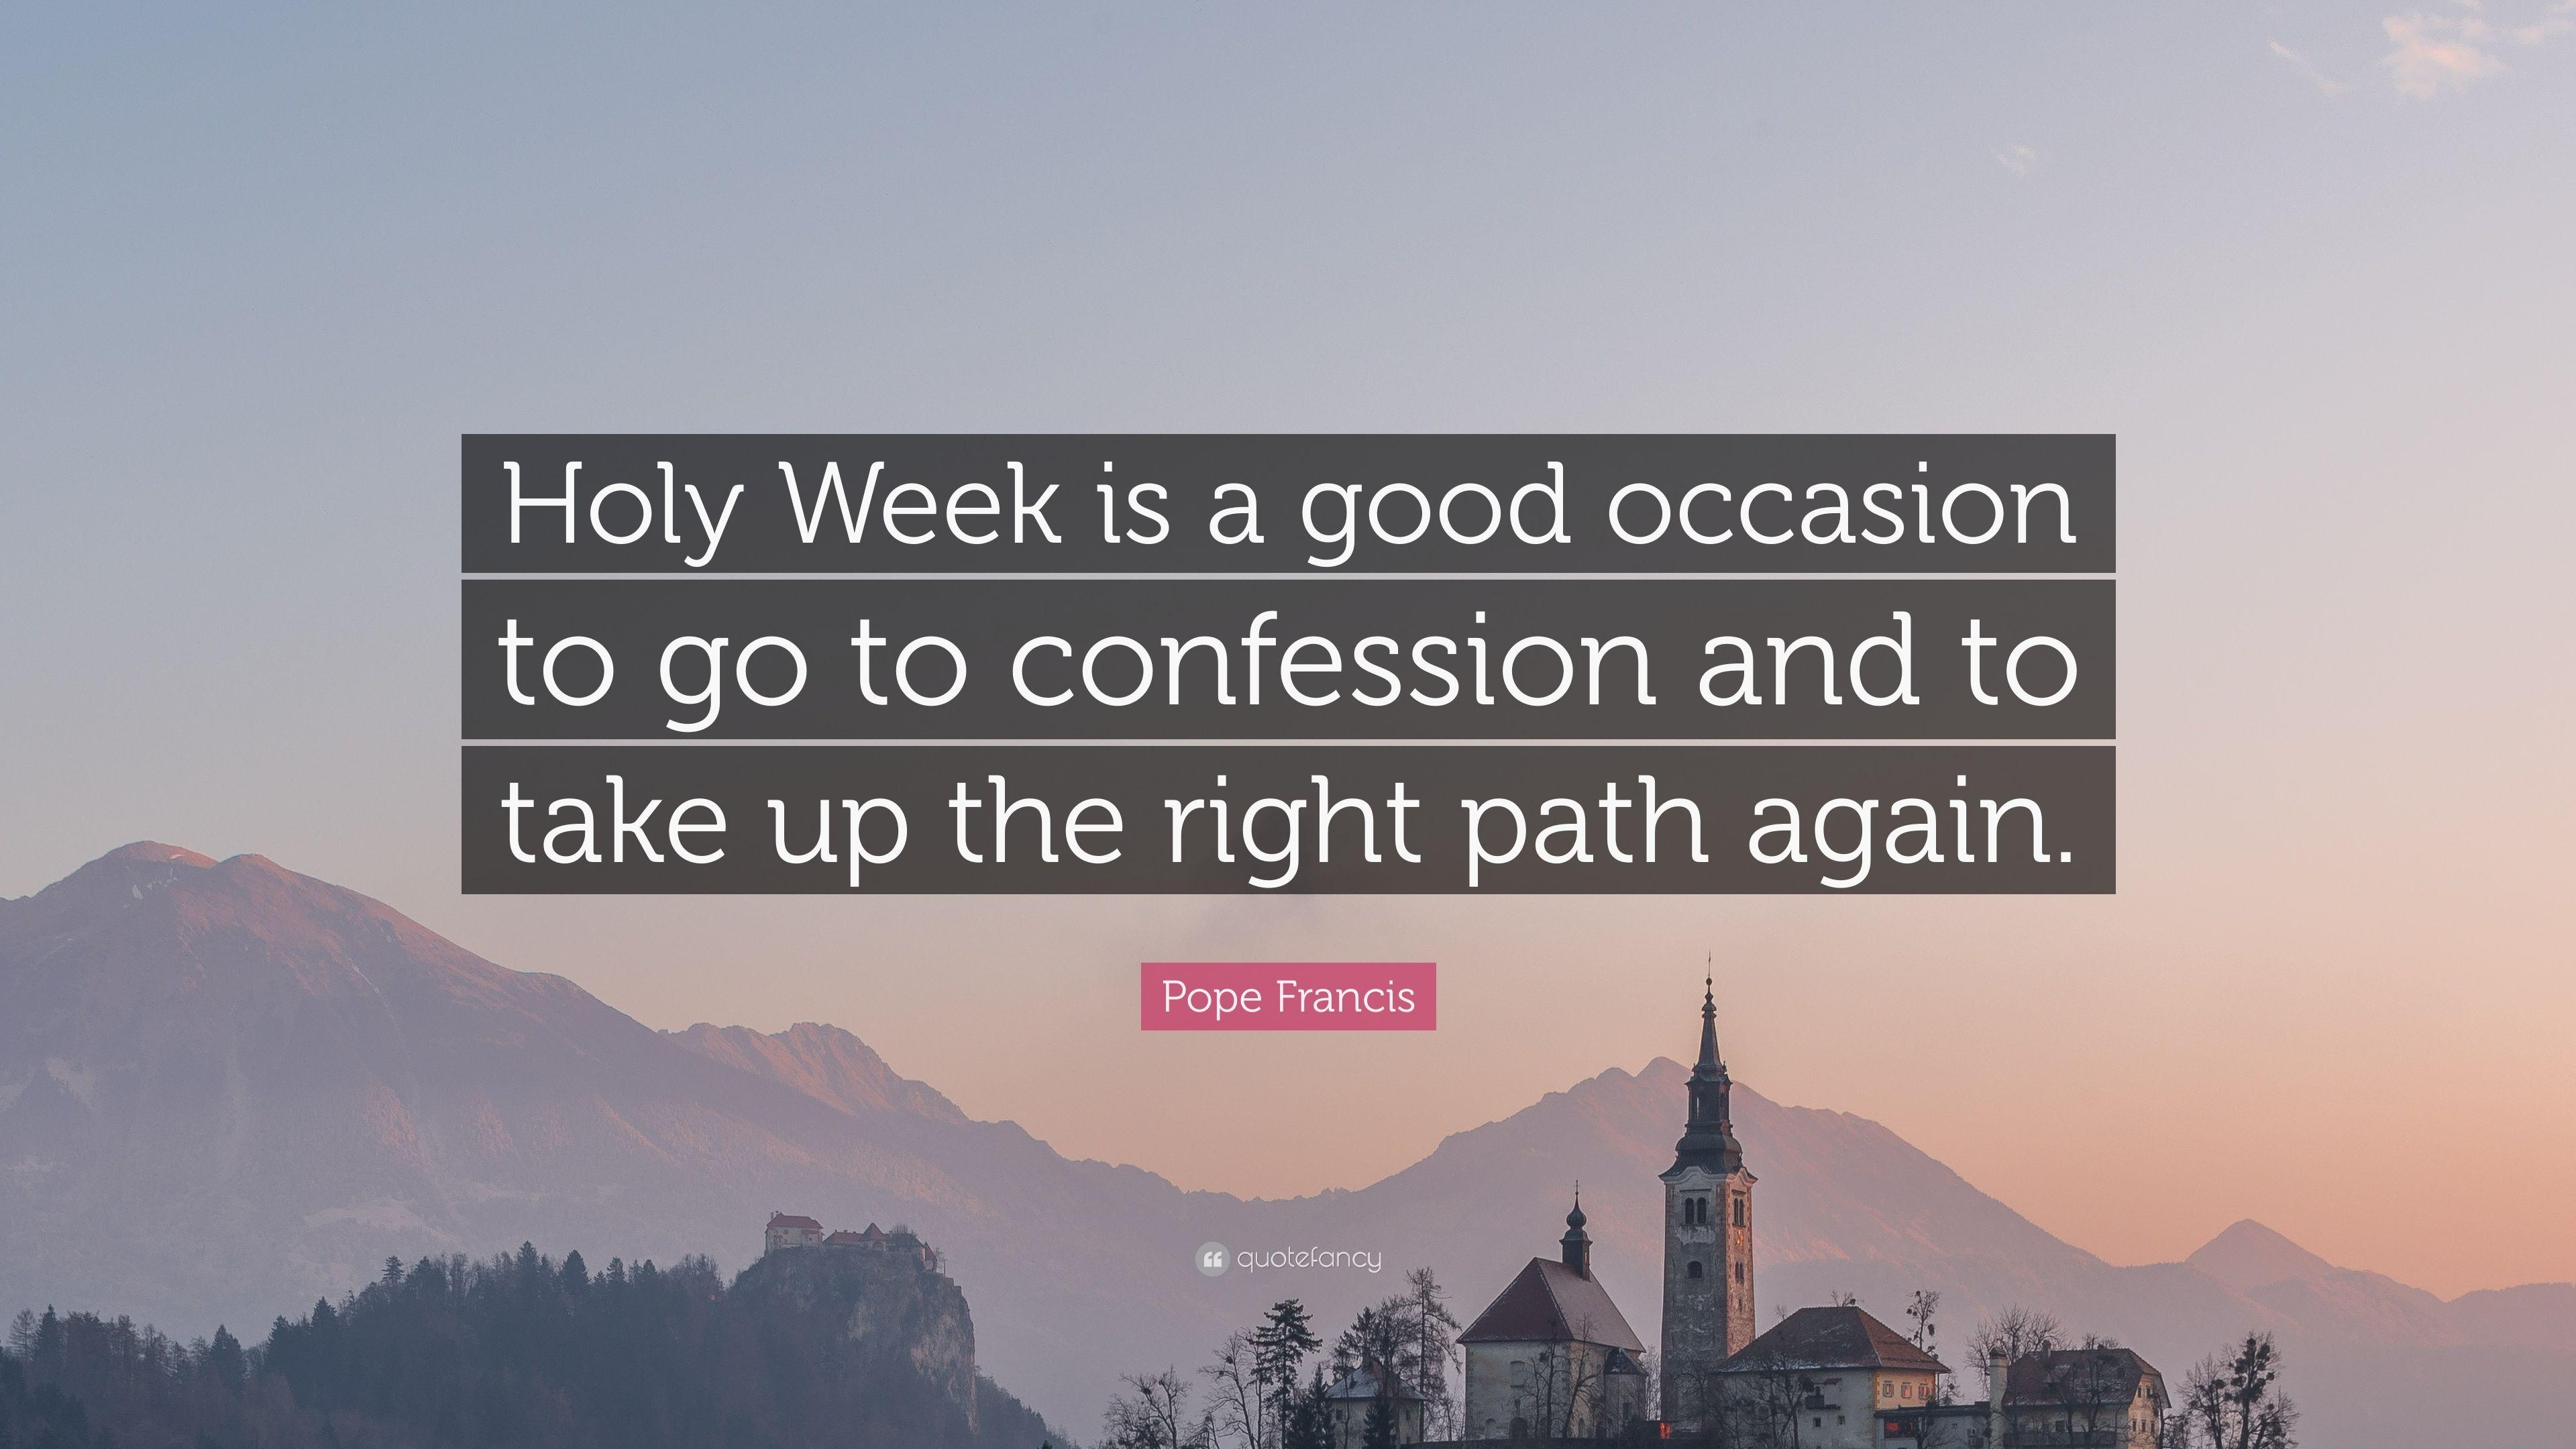 Pope Francis Quote: “Holy Week is a good occasion to go to